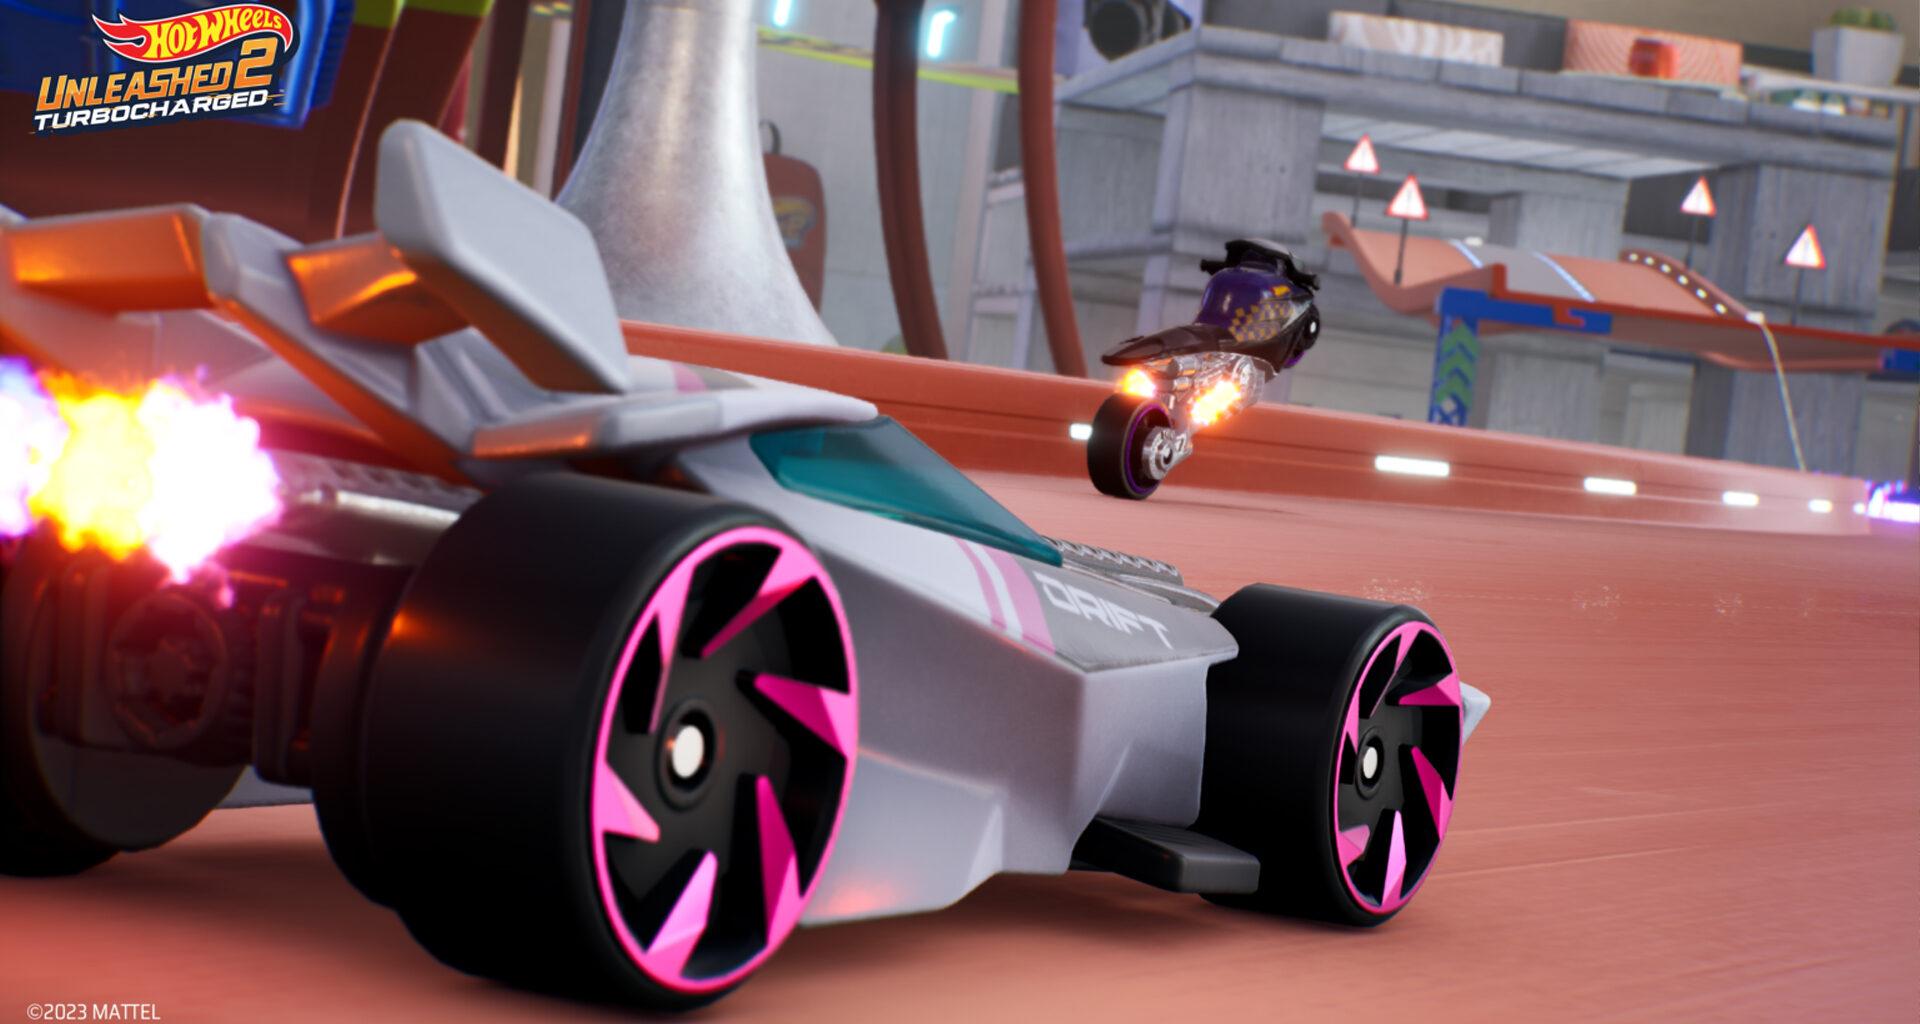 New Possibilities gameplay trailer for Hot Wheels Unleashed 2 - Turbocharged reveals new features